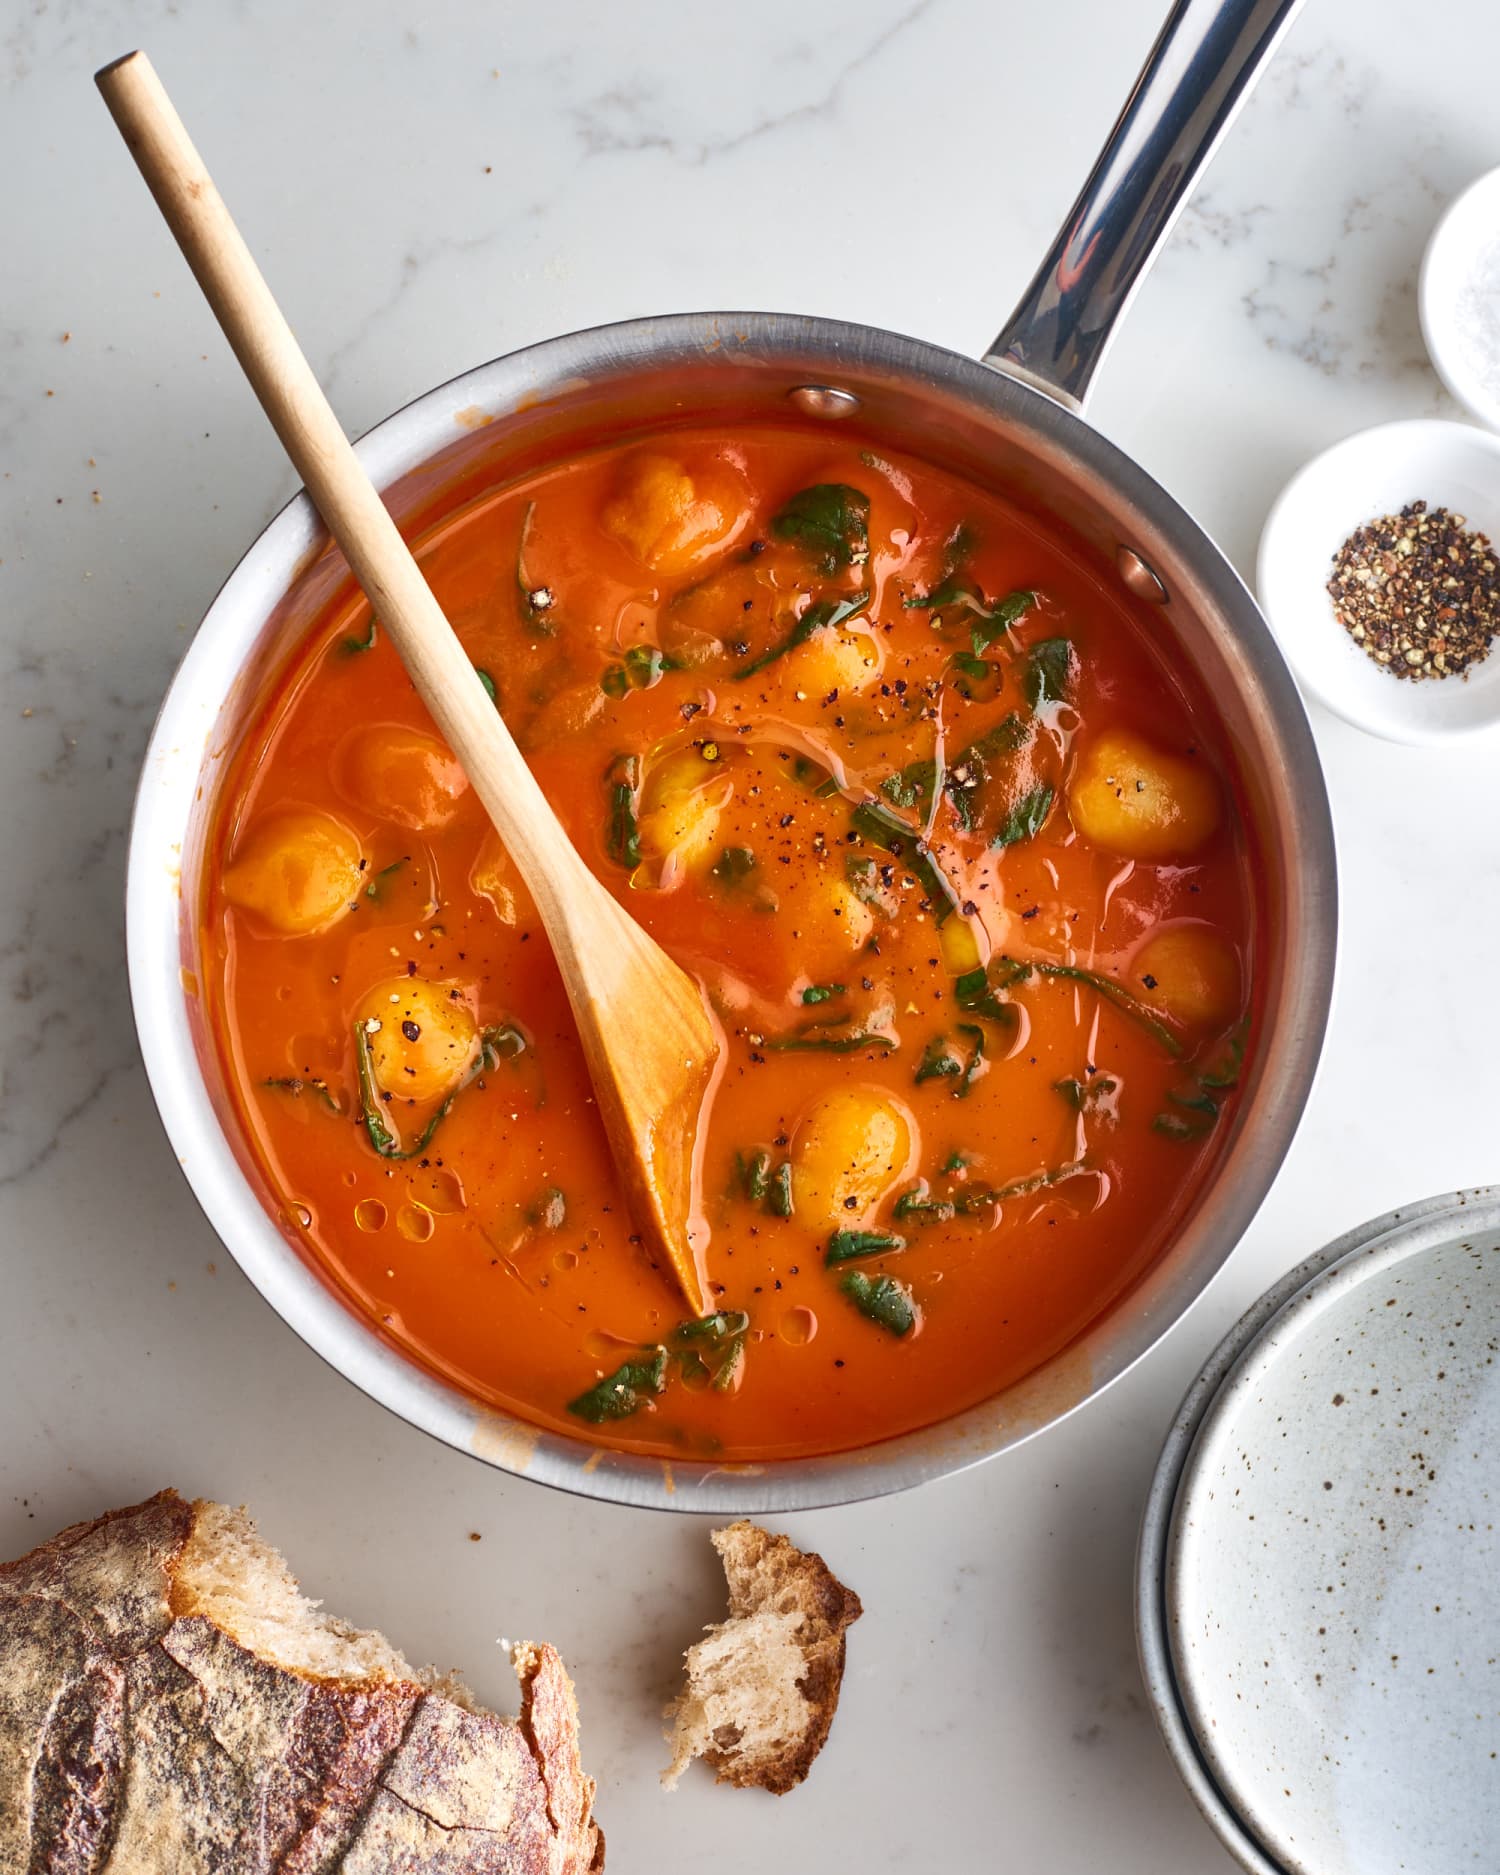 Tomato Soup with Stuffed Gnocchi and Spinach